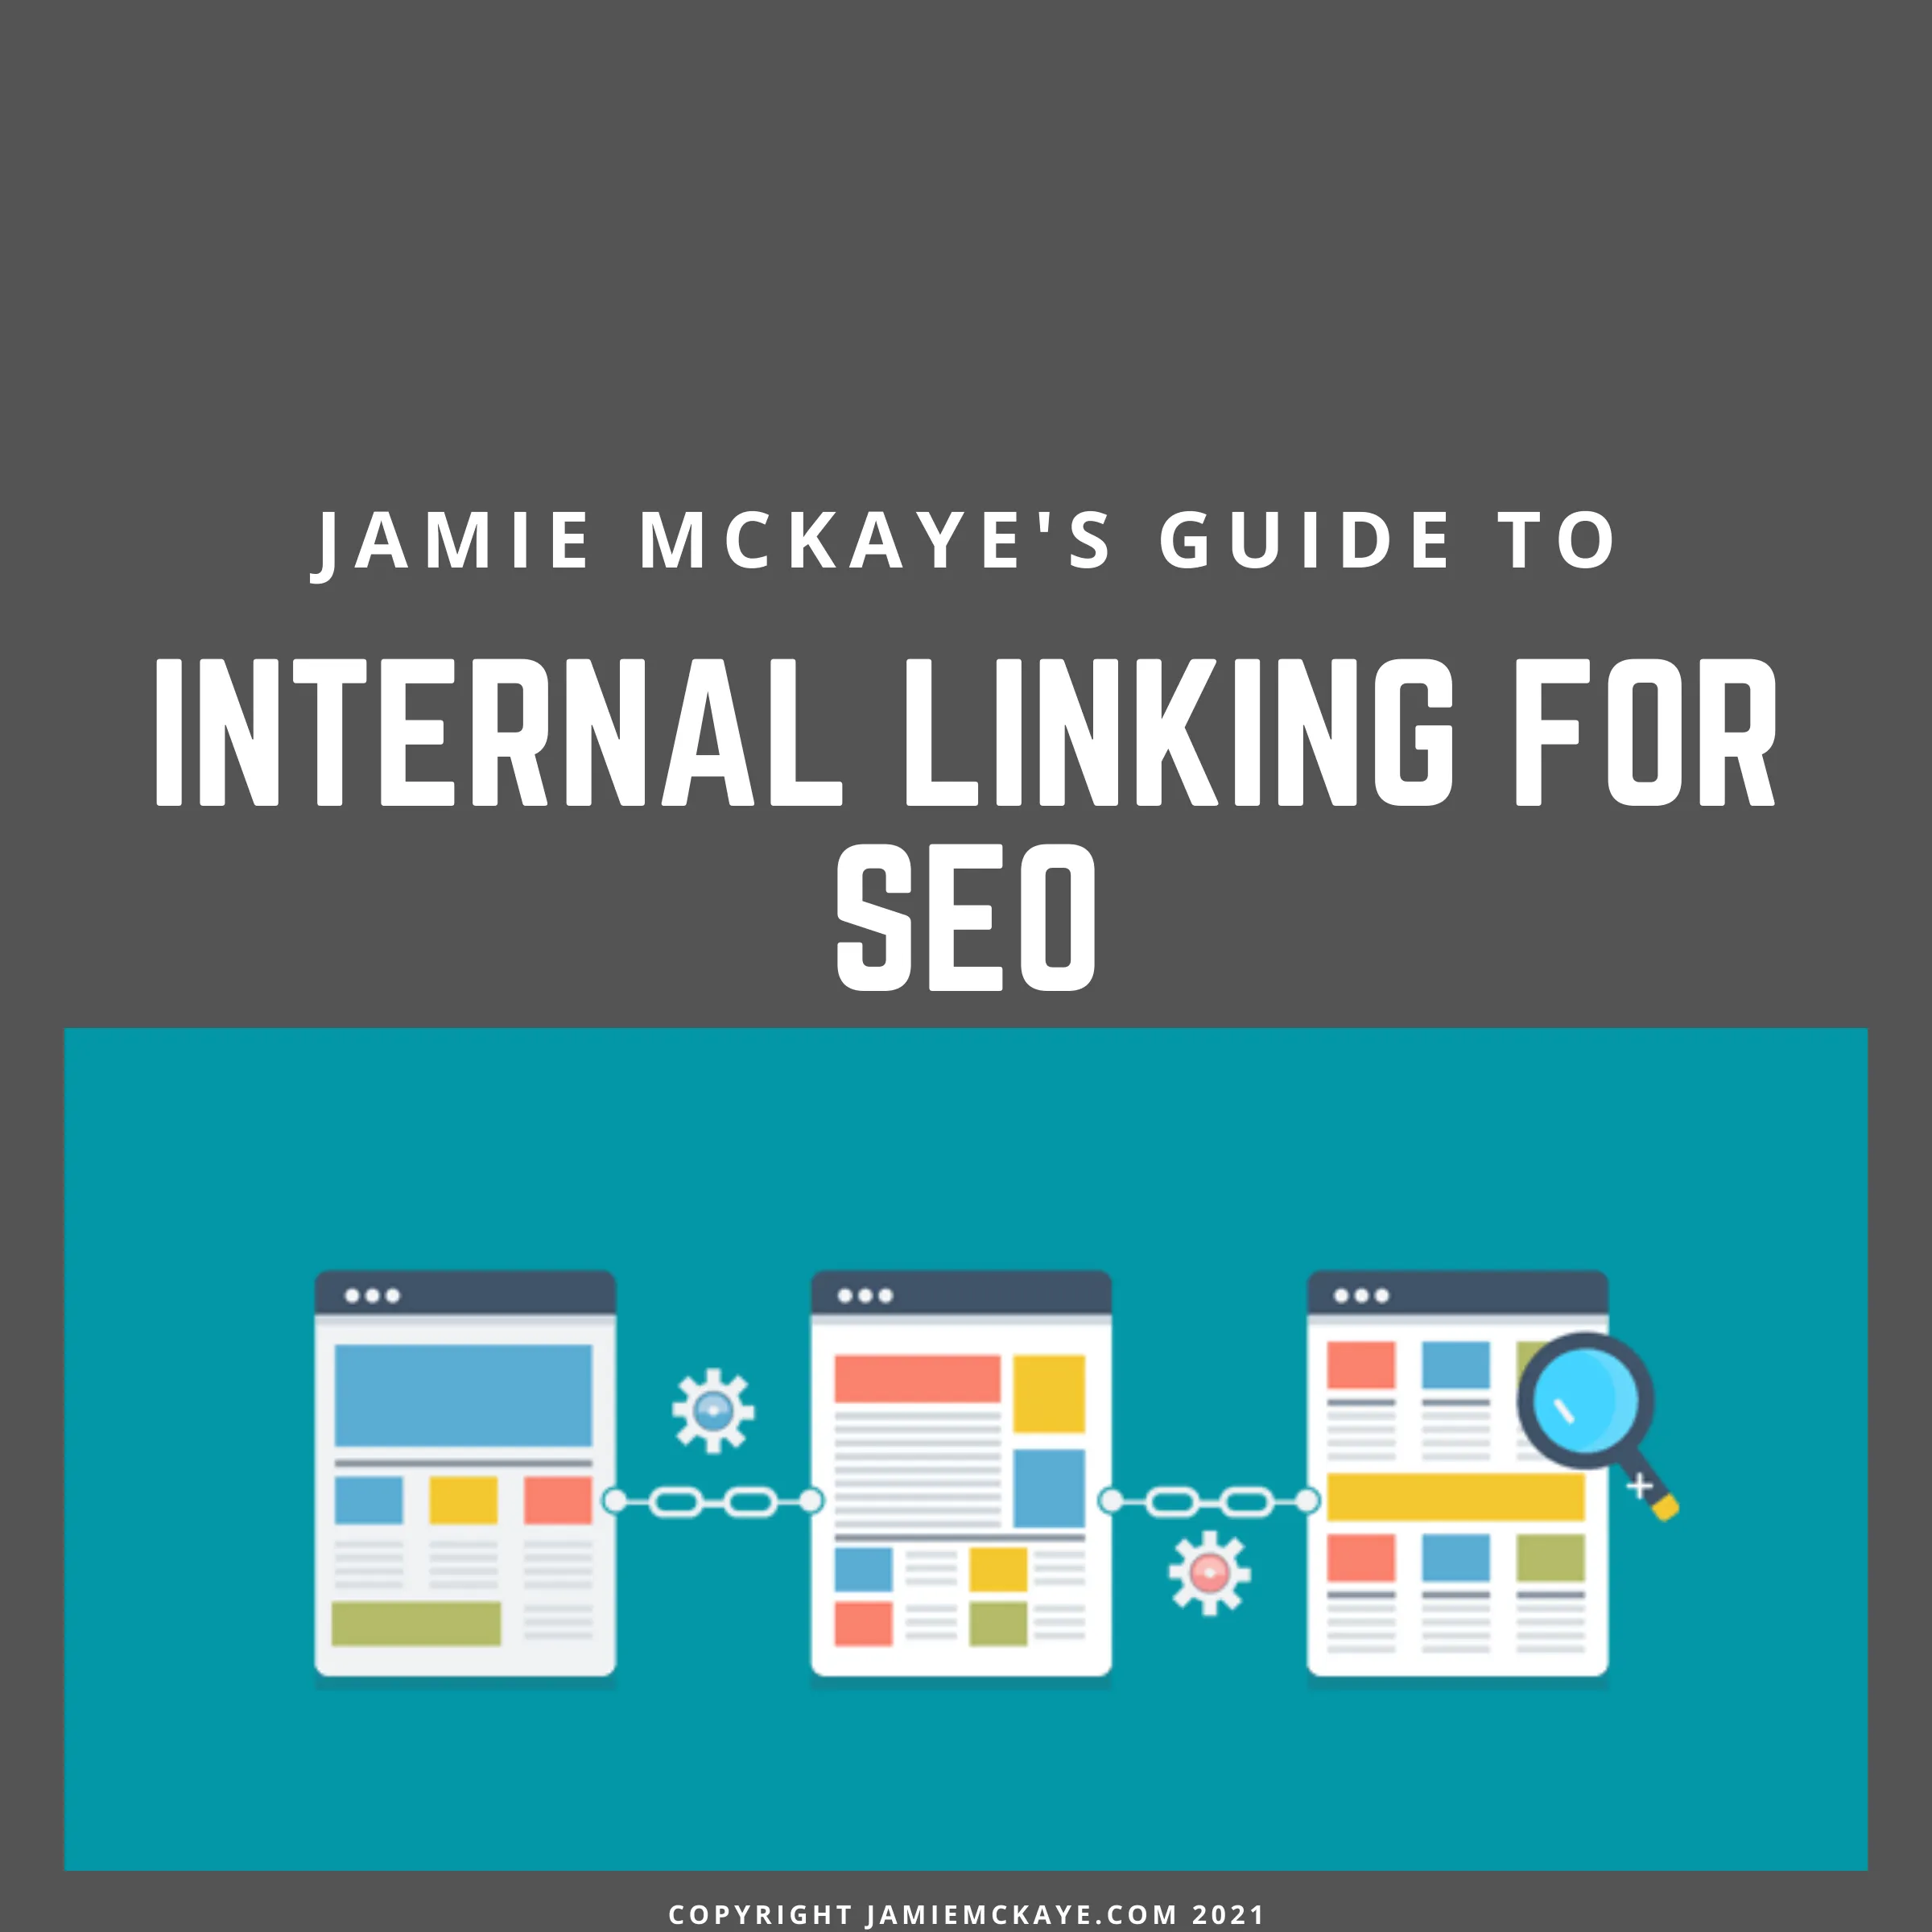 Jamie McKayes Guide to Internal Linking for SEO